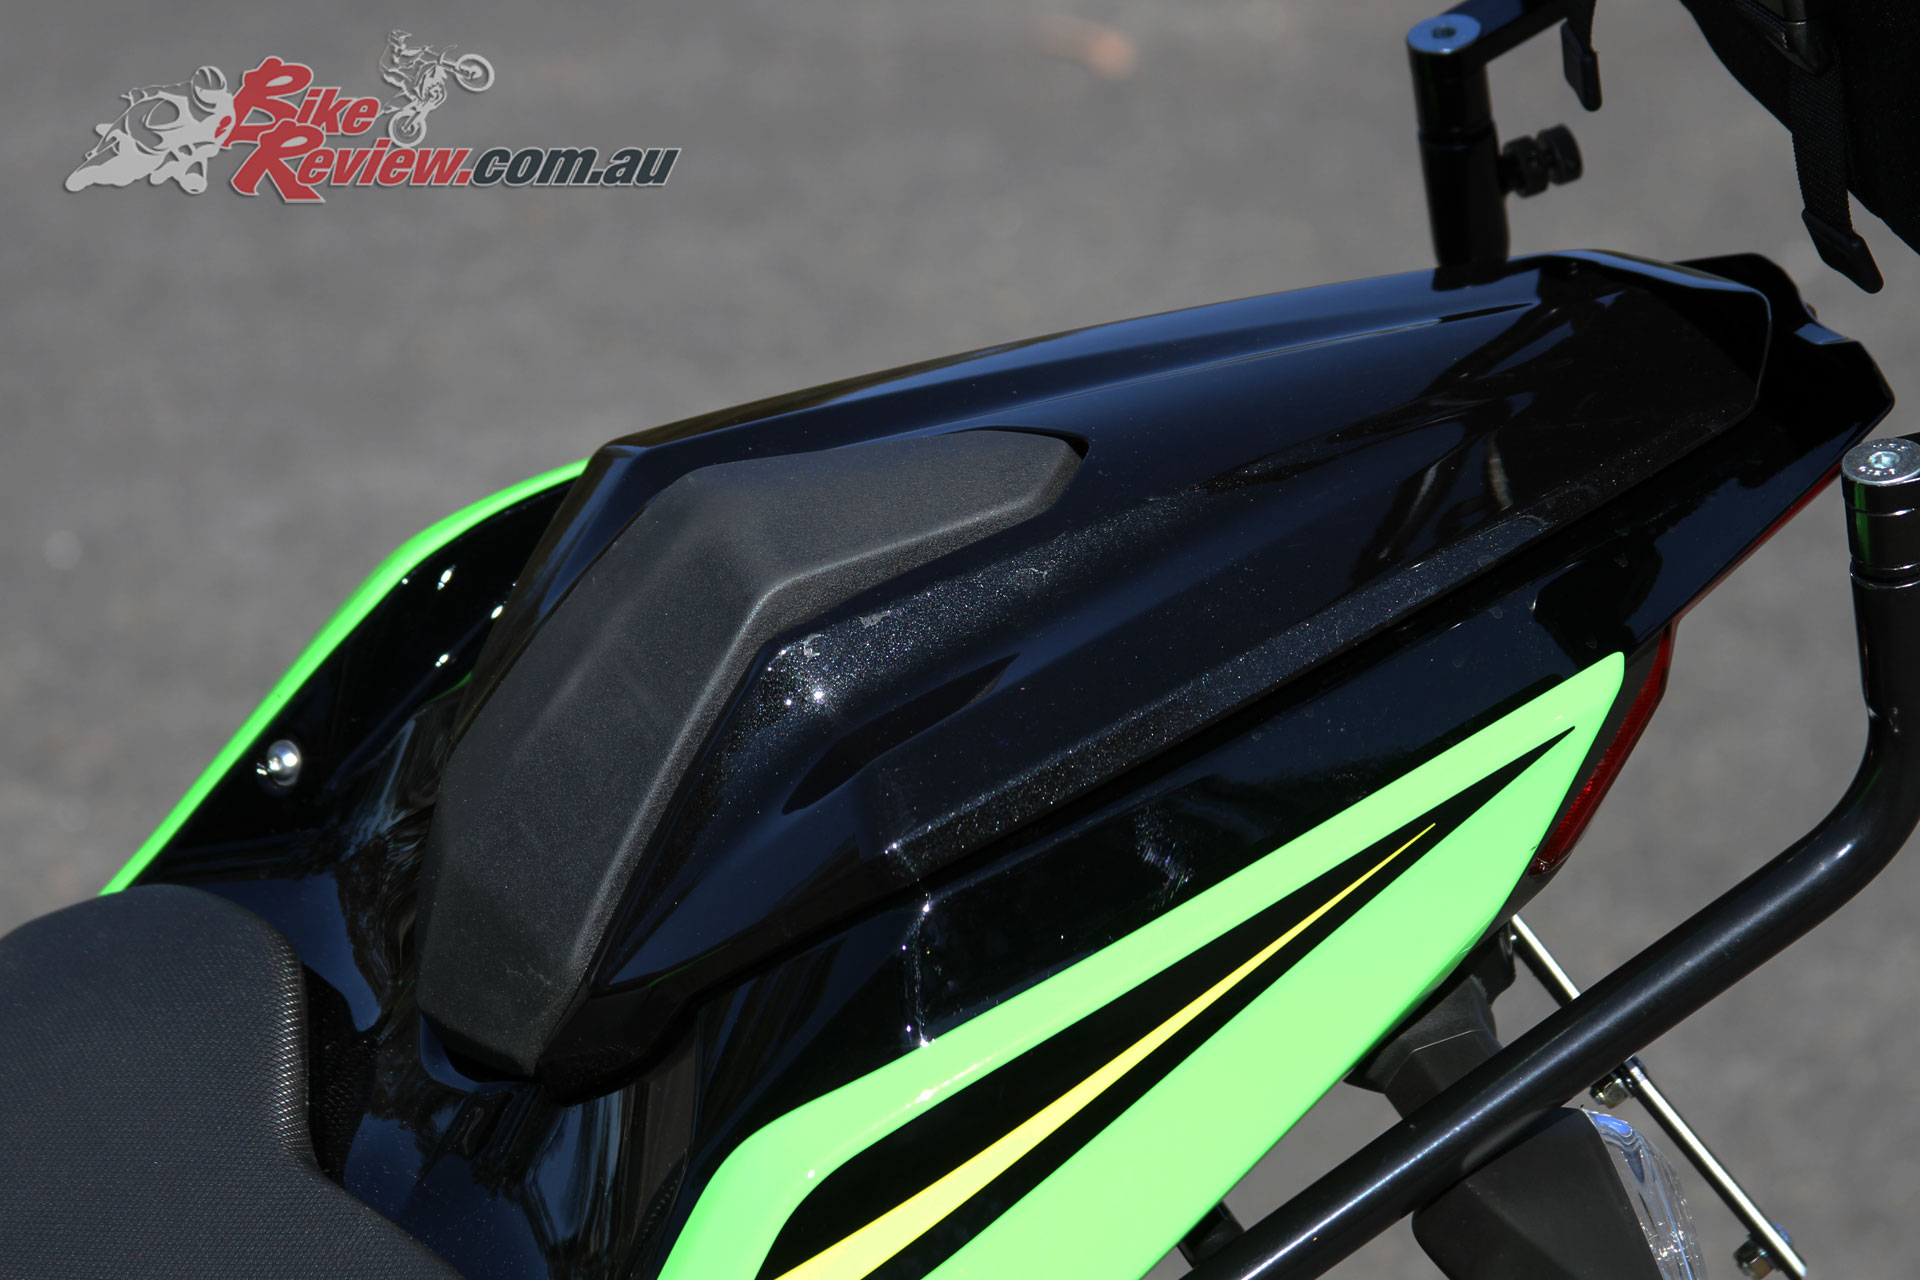 $200 for the colour-matched Kawasaki seat cowl is pretty good value in my book!